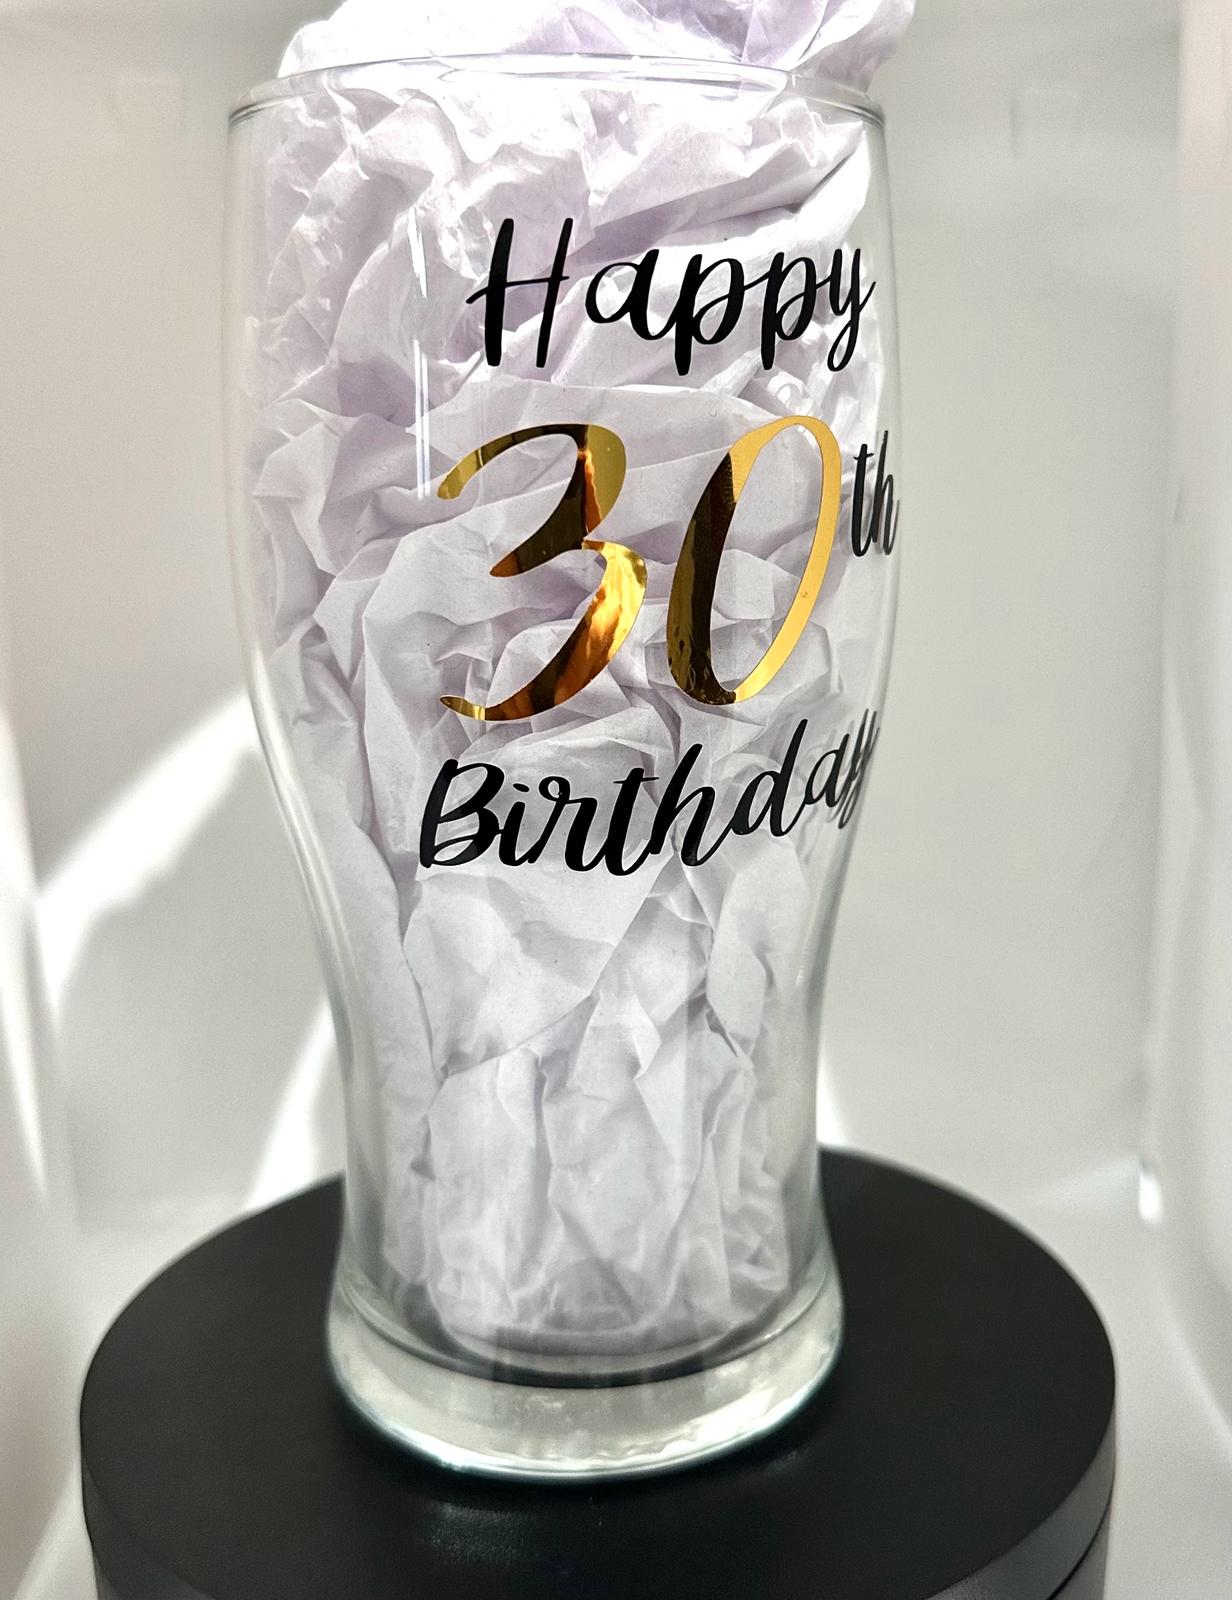 Personalised Birthday pint glass glass - 18th, 21st, 30th, 40th etc. Any age available -  perfect gifts for birthdays.